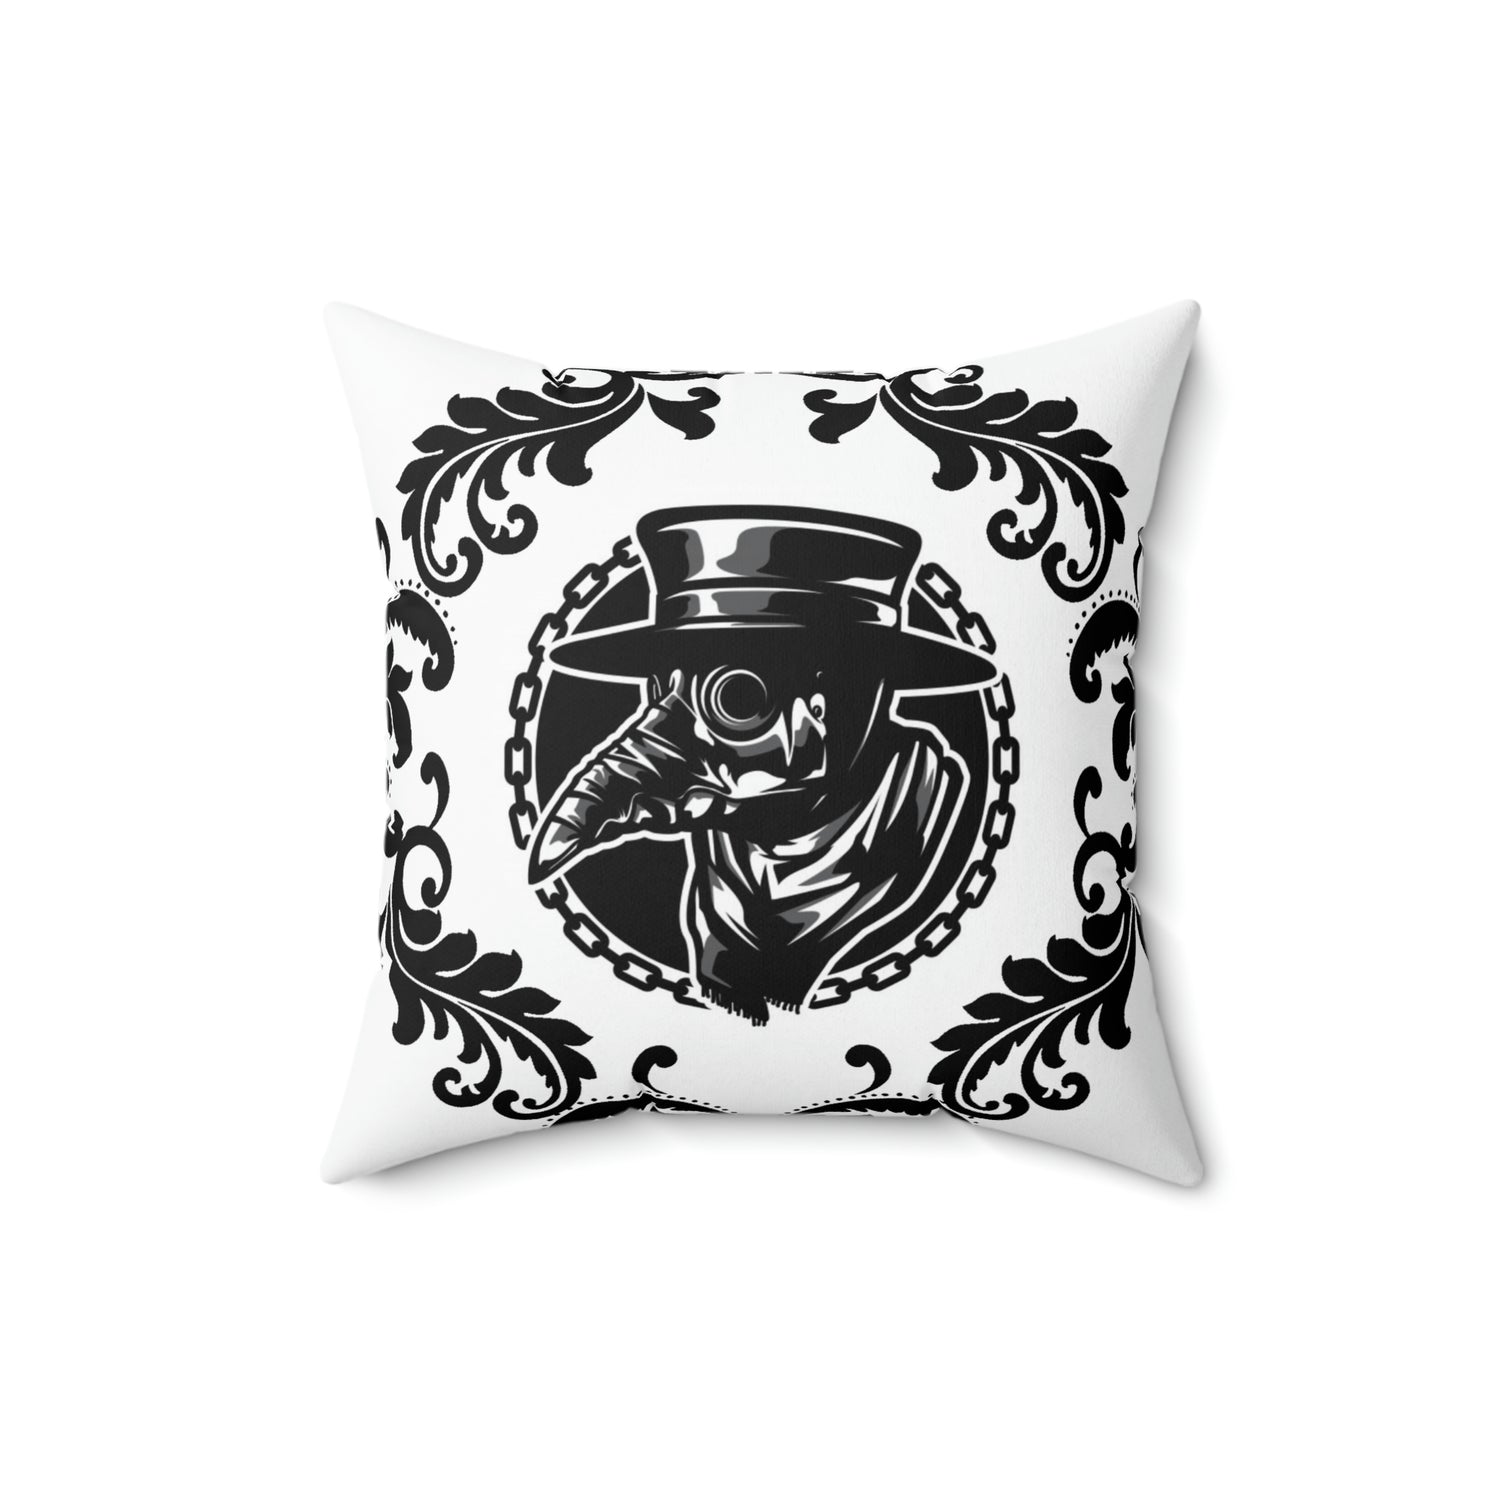 Plague Doctor Filigree Accent Throw Pillow for Gothic Home Decor Lord and Lady Towers